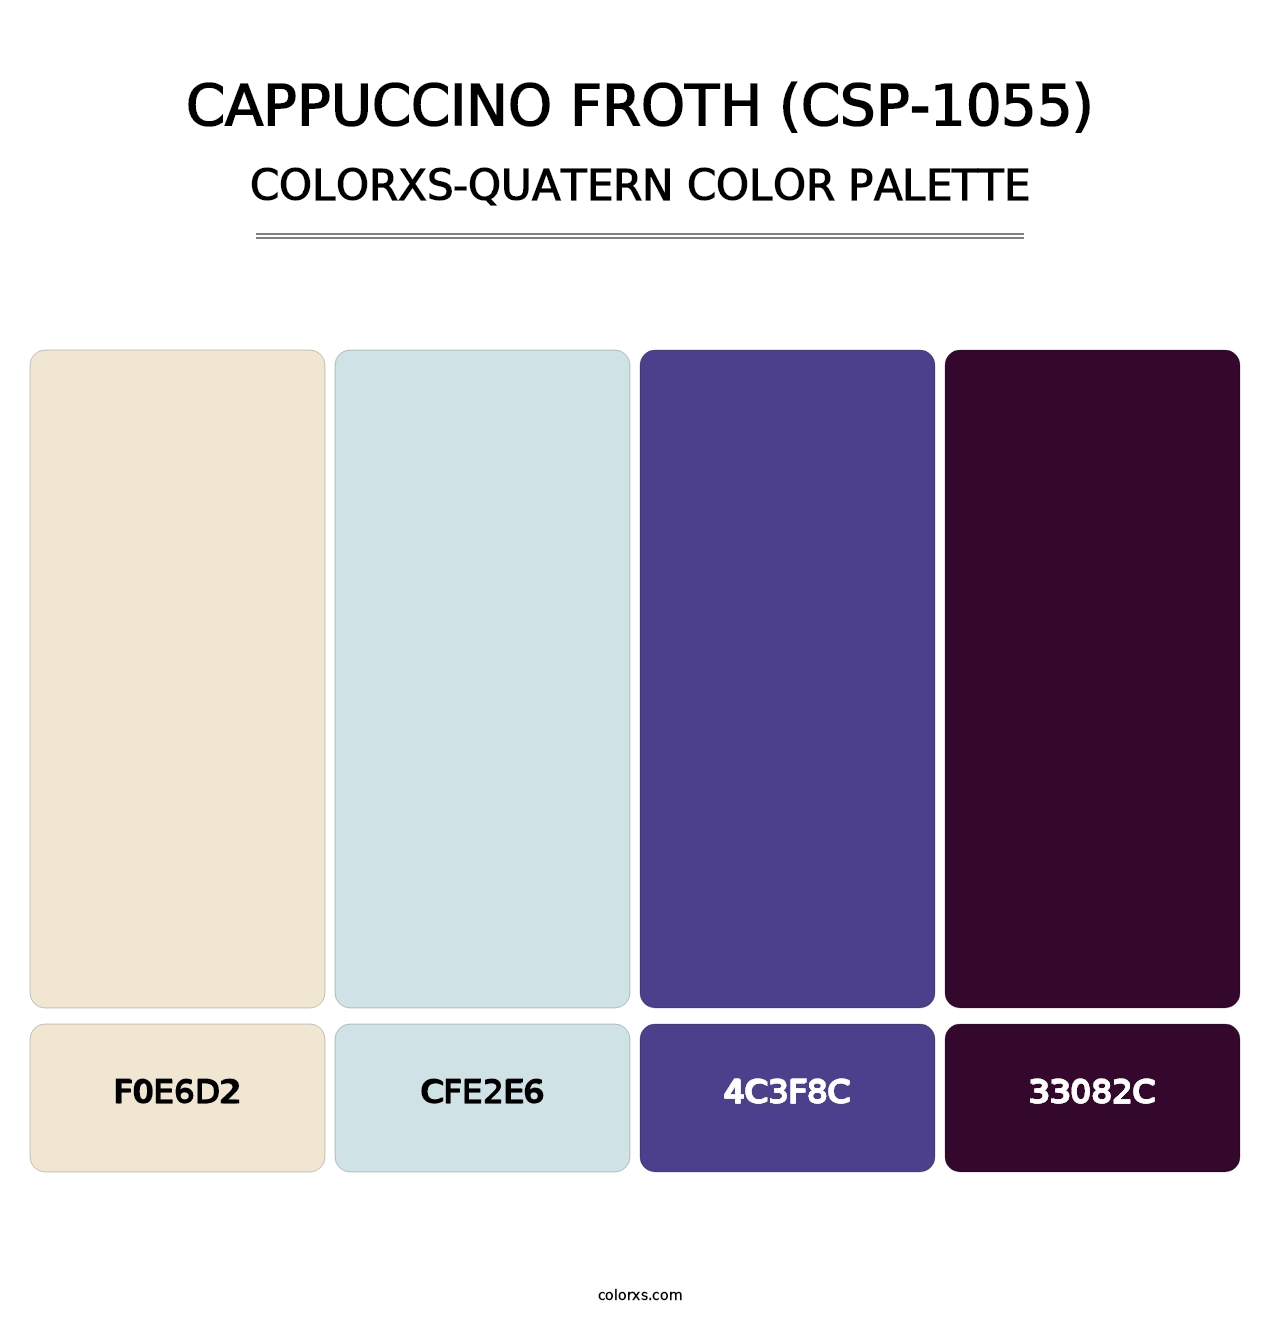 Cappuccino Froth (CSP-1055) - Colorxs Quatern Palette